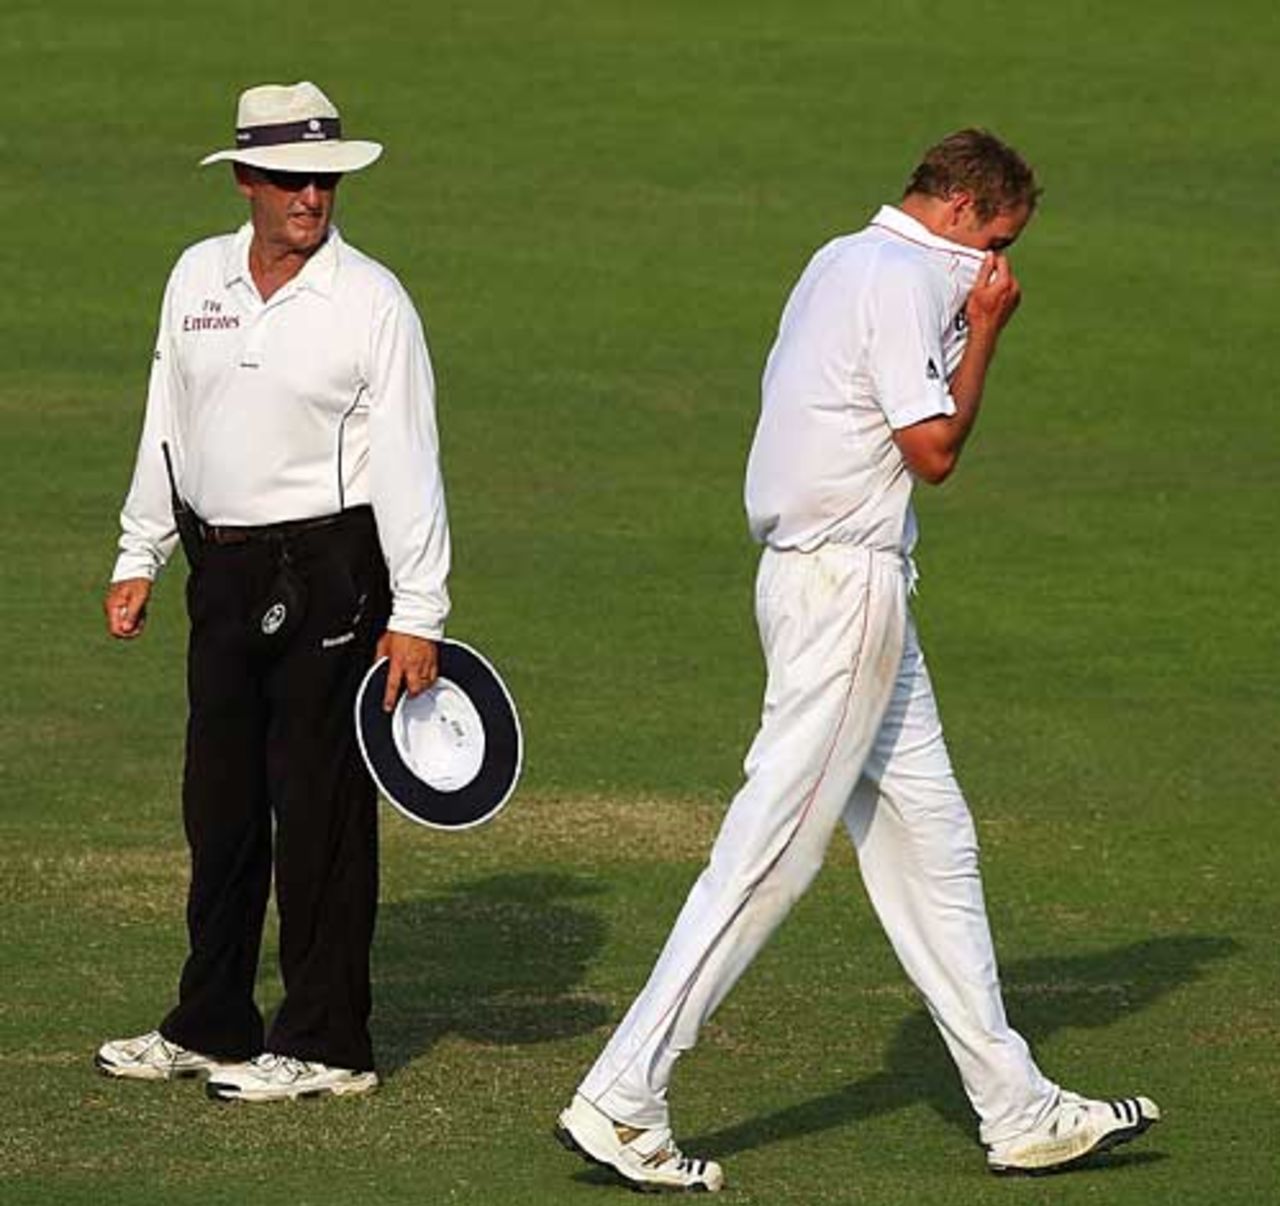 Stuart Broad shows his frustration after an lbw appeal is turned down by Tony Hill, Bangladesh v England, 2nd Test, Dhaka, March 23, 2010